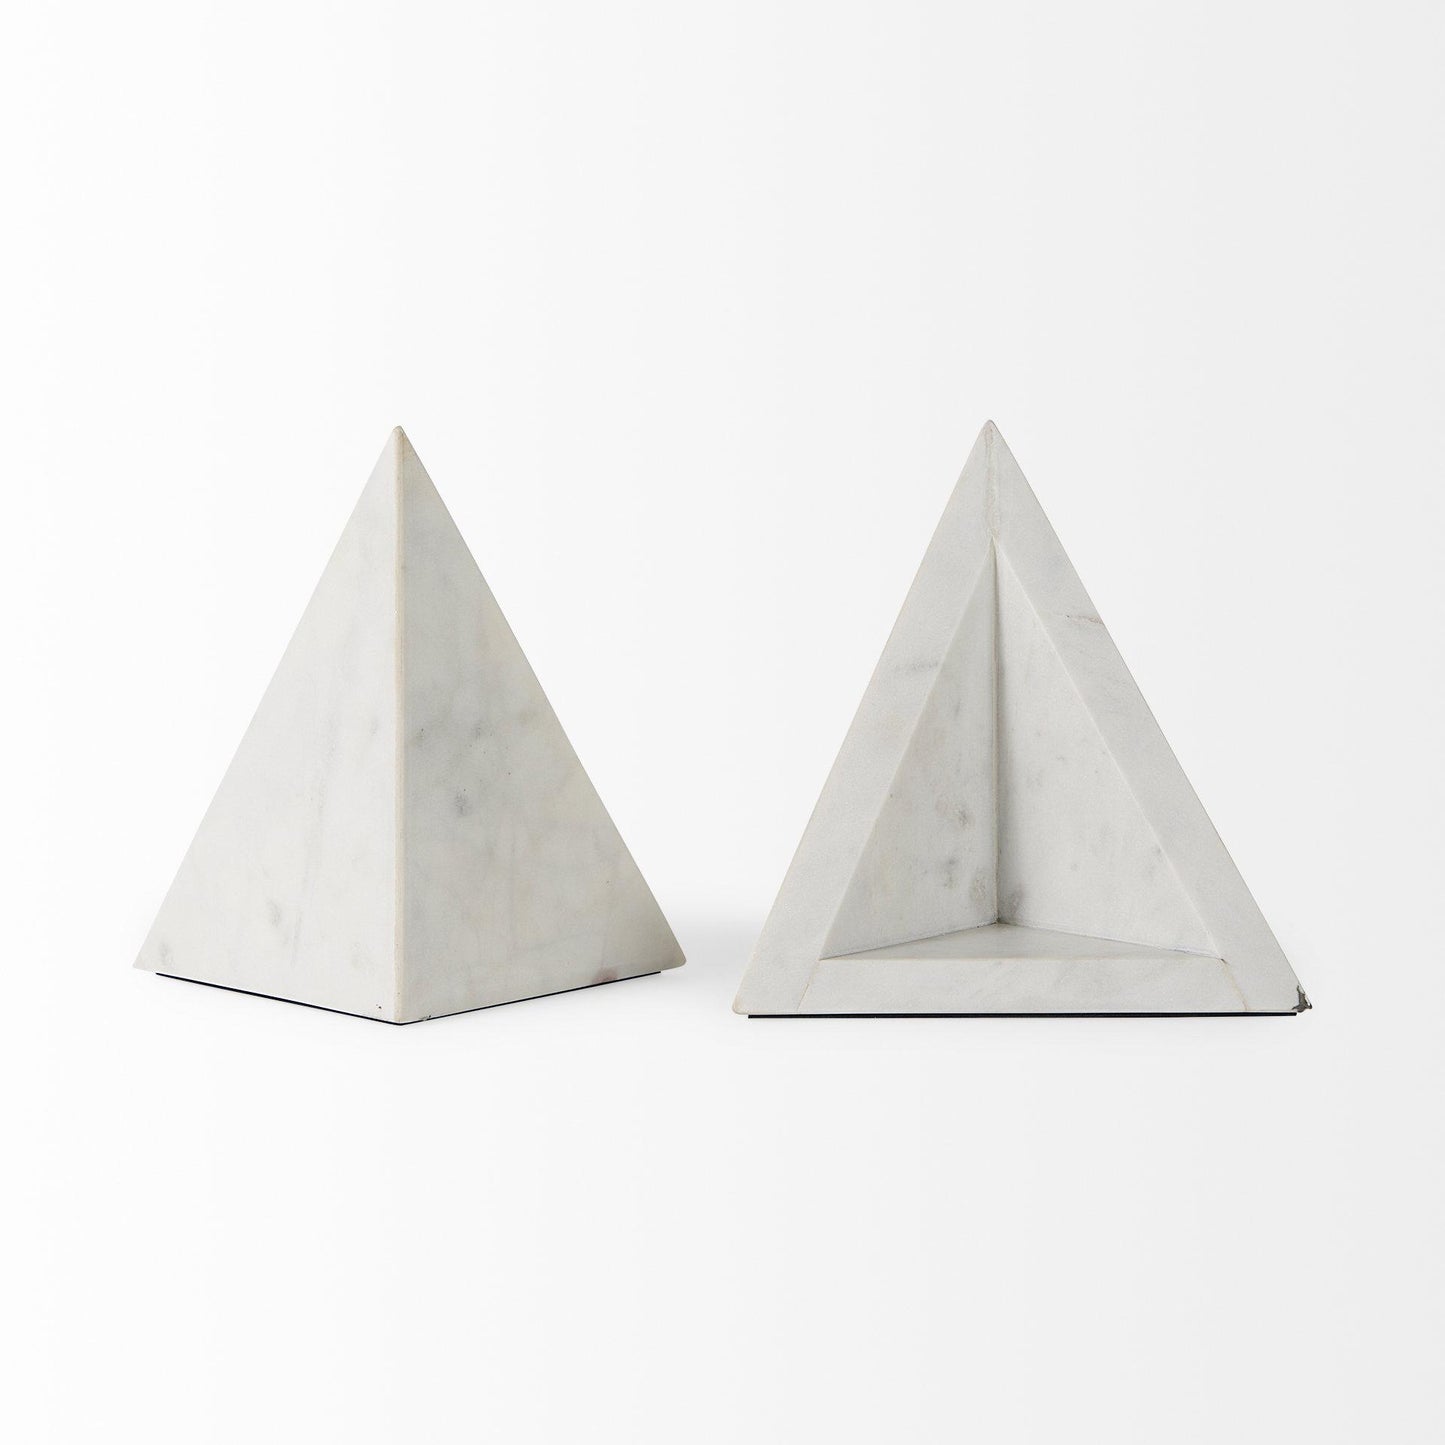 Sophia 8.0"L x 6.0"W x 7.0"H Marble Set Of Two Bookends